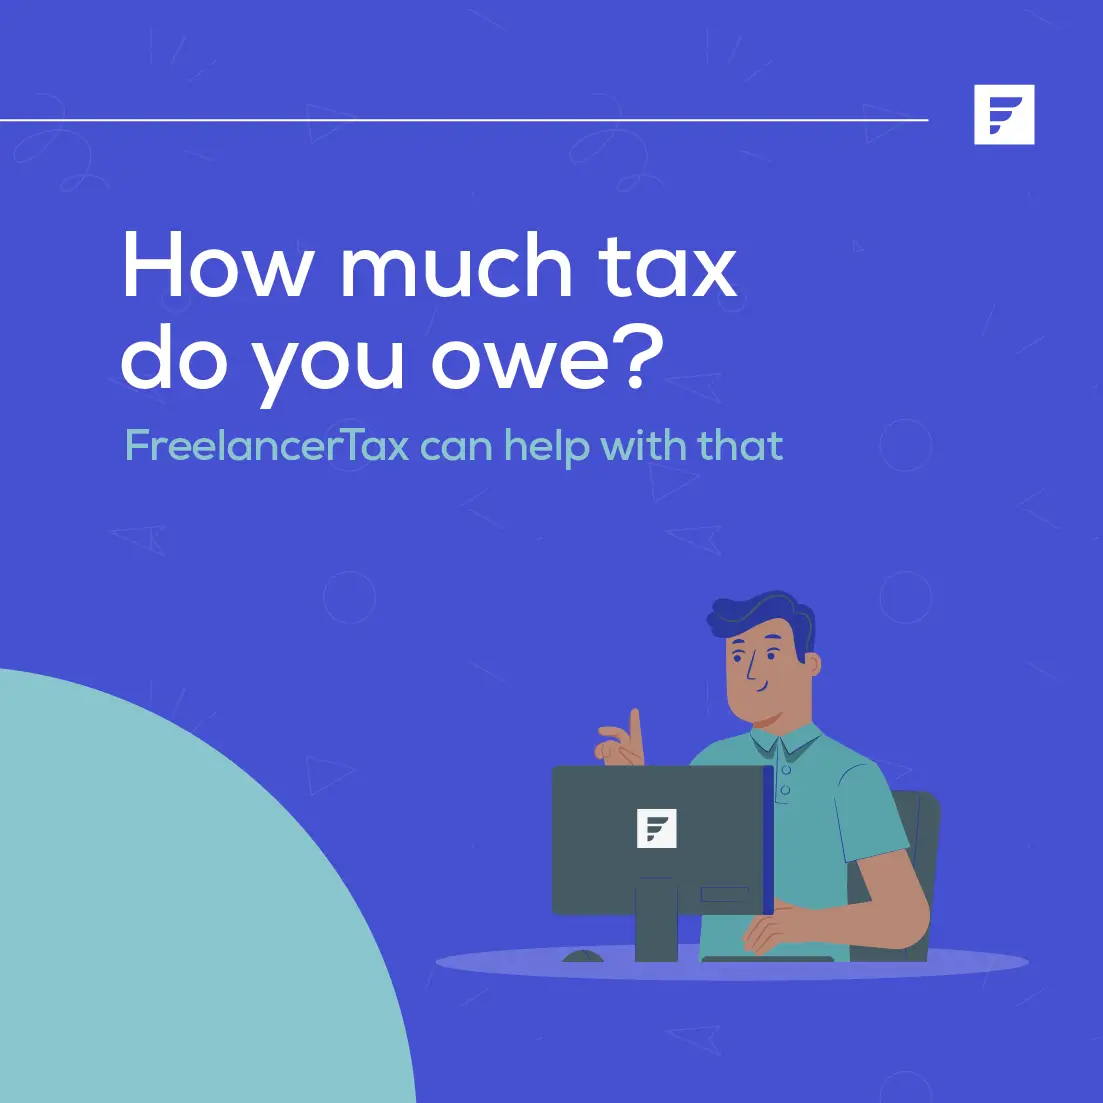 How much tax do you owe? in 2021